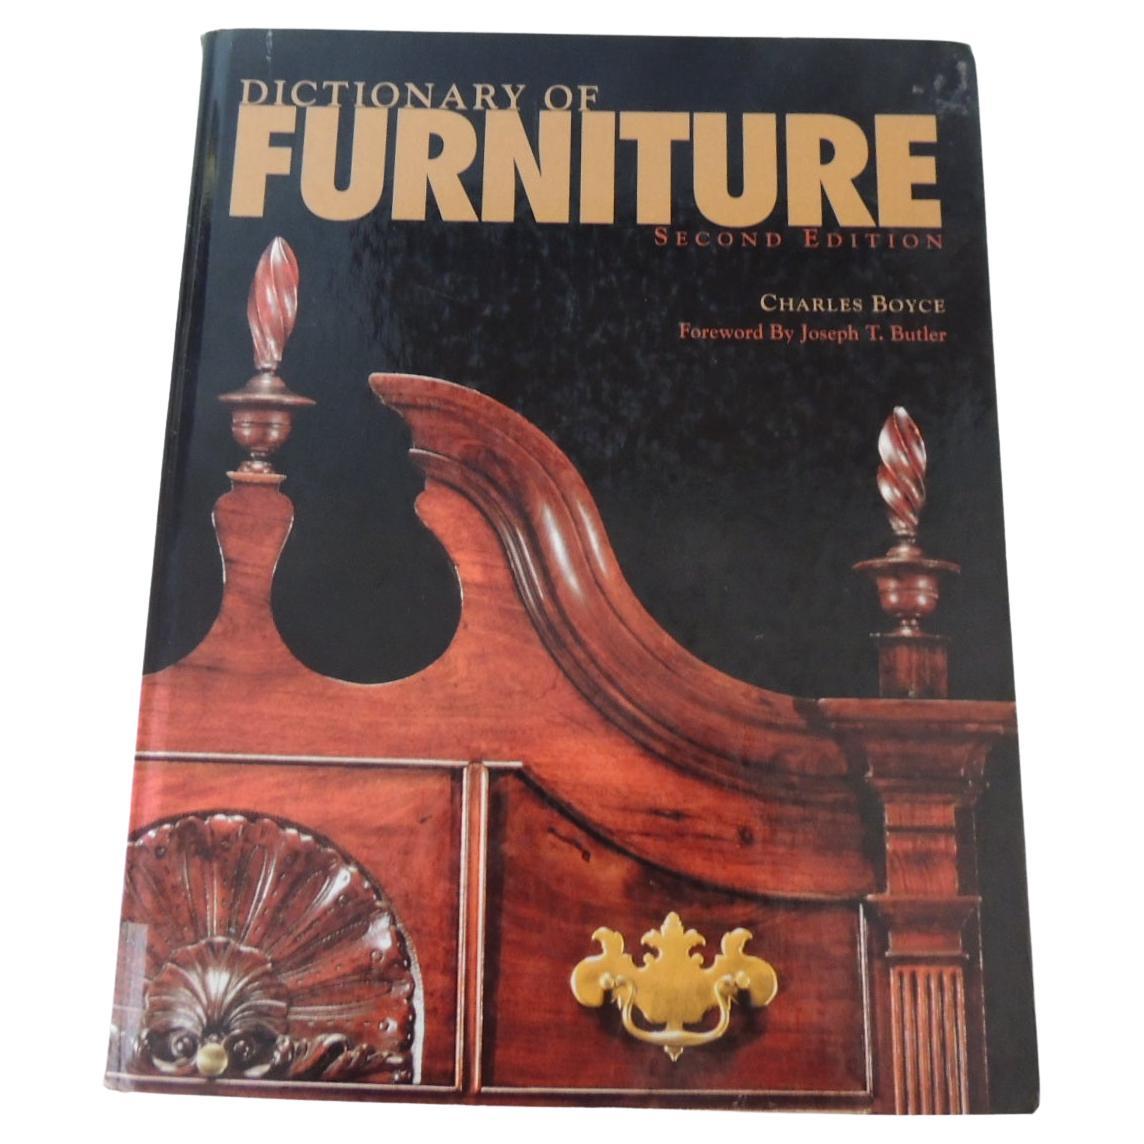 Dictionary of Furniture: Third Edition Hardcover Book